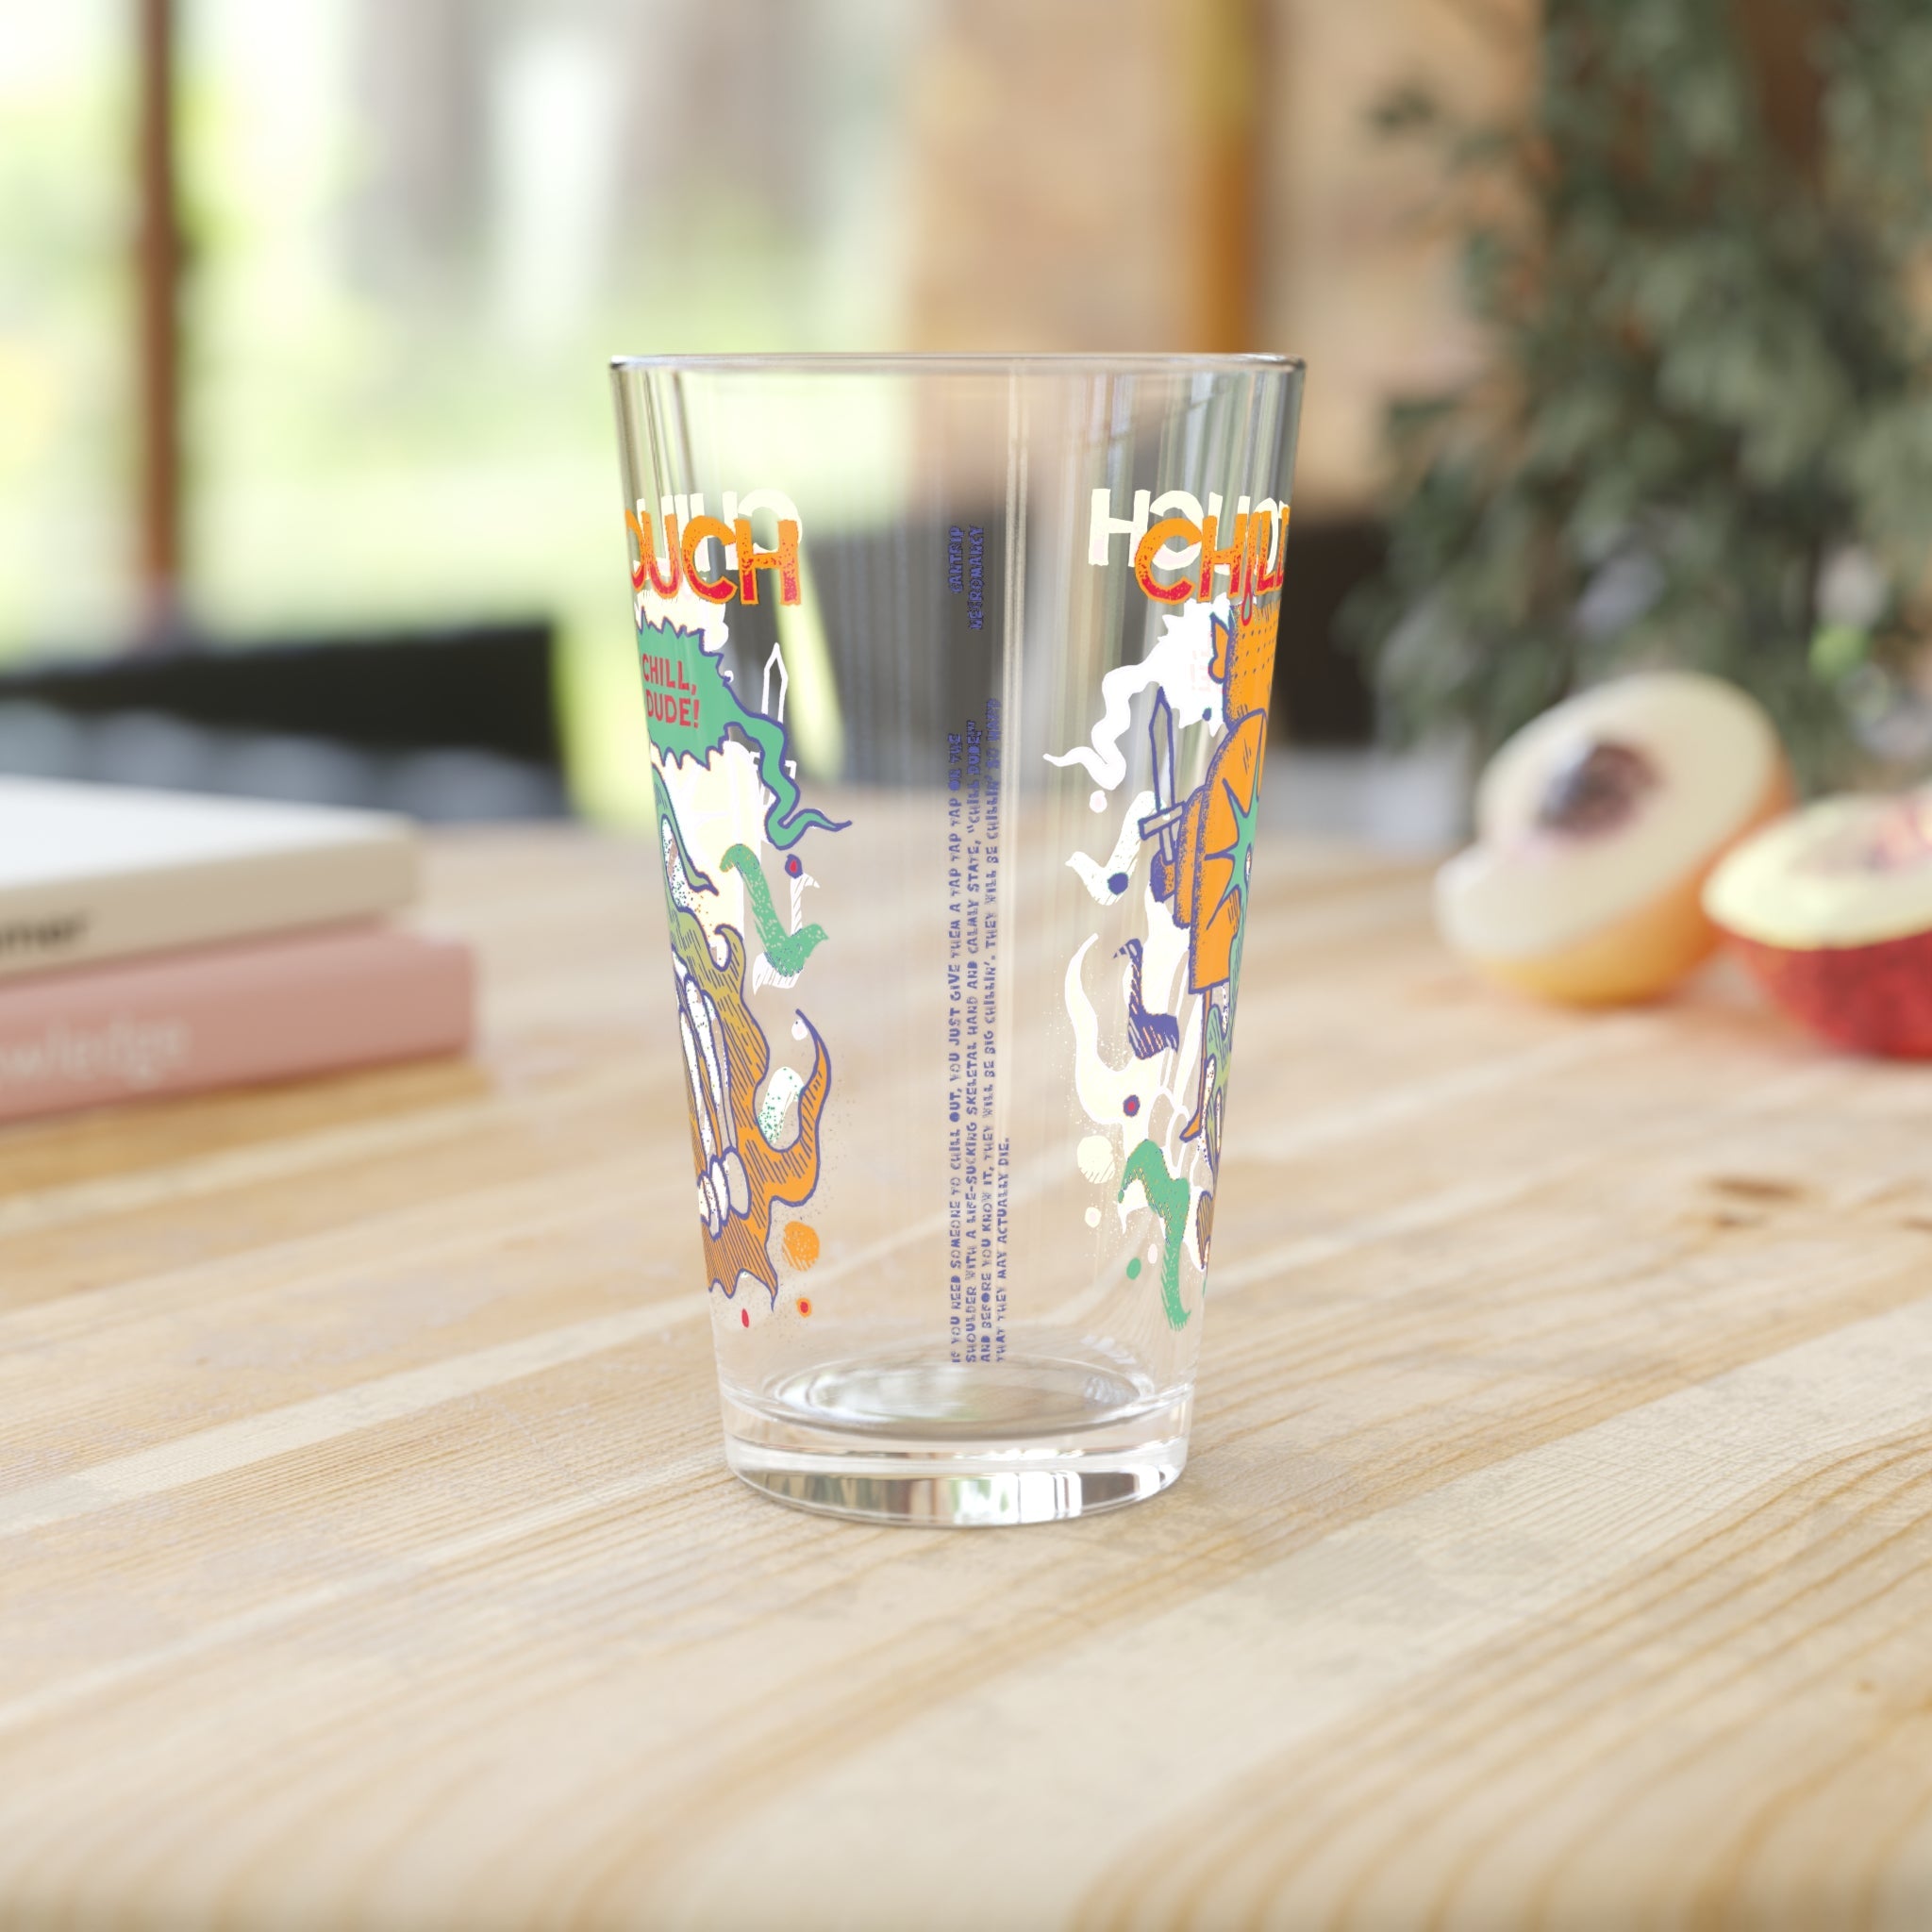 Chill Touch | Pint Glass, 16oz - Drinkware Sets - Ace of Gnomes - 63829116595892833116